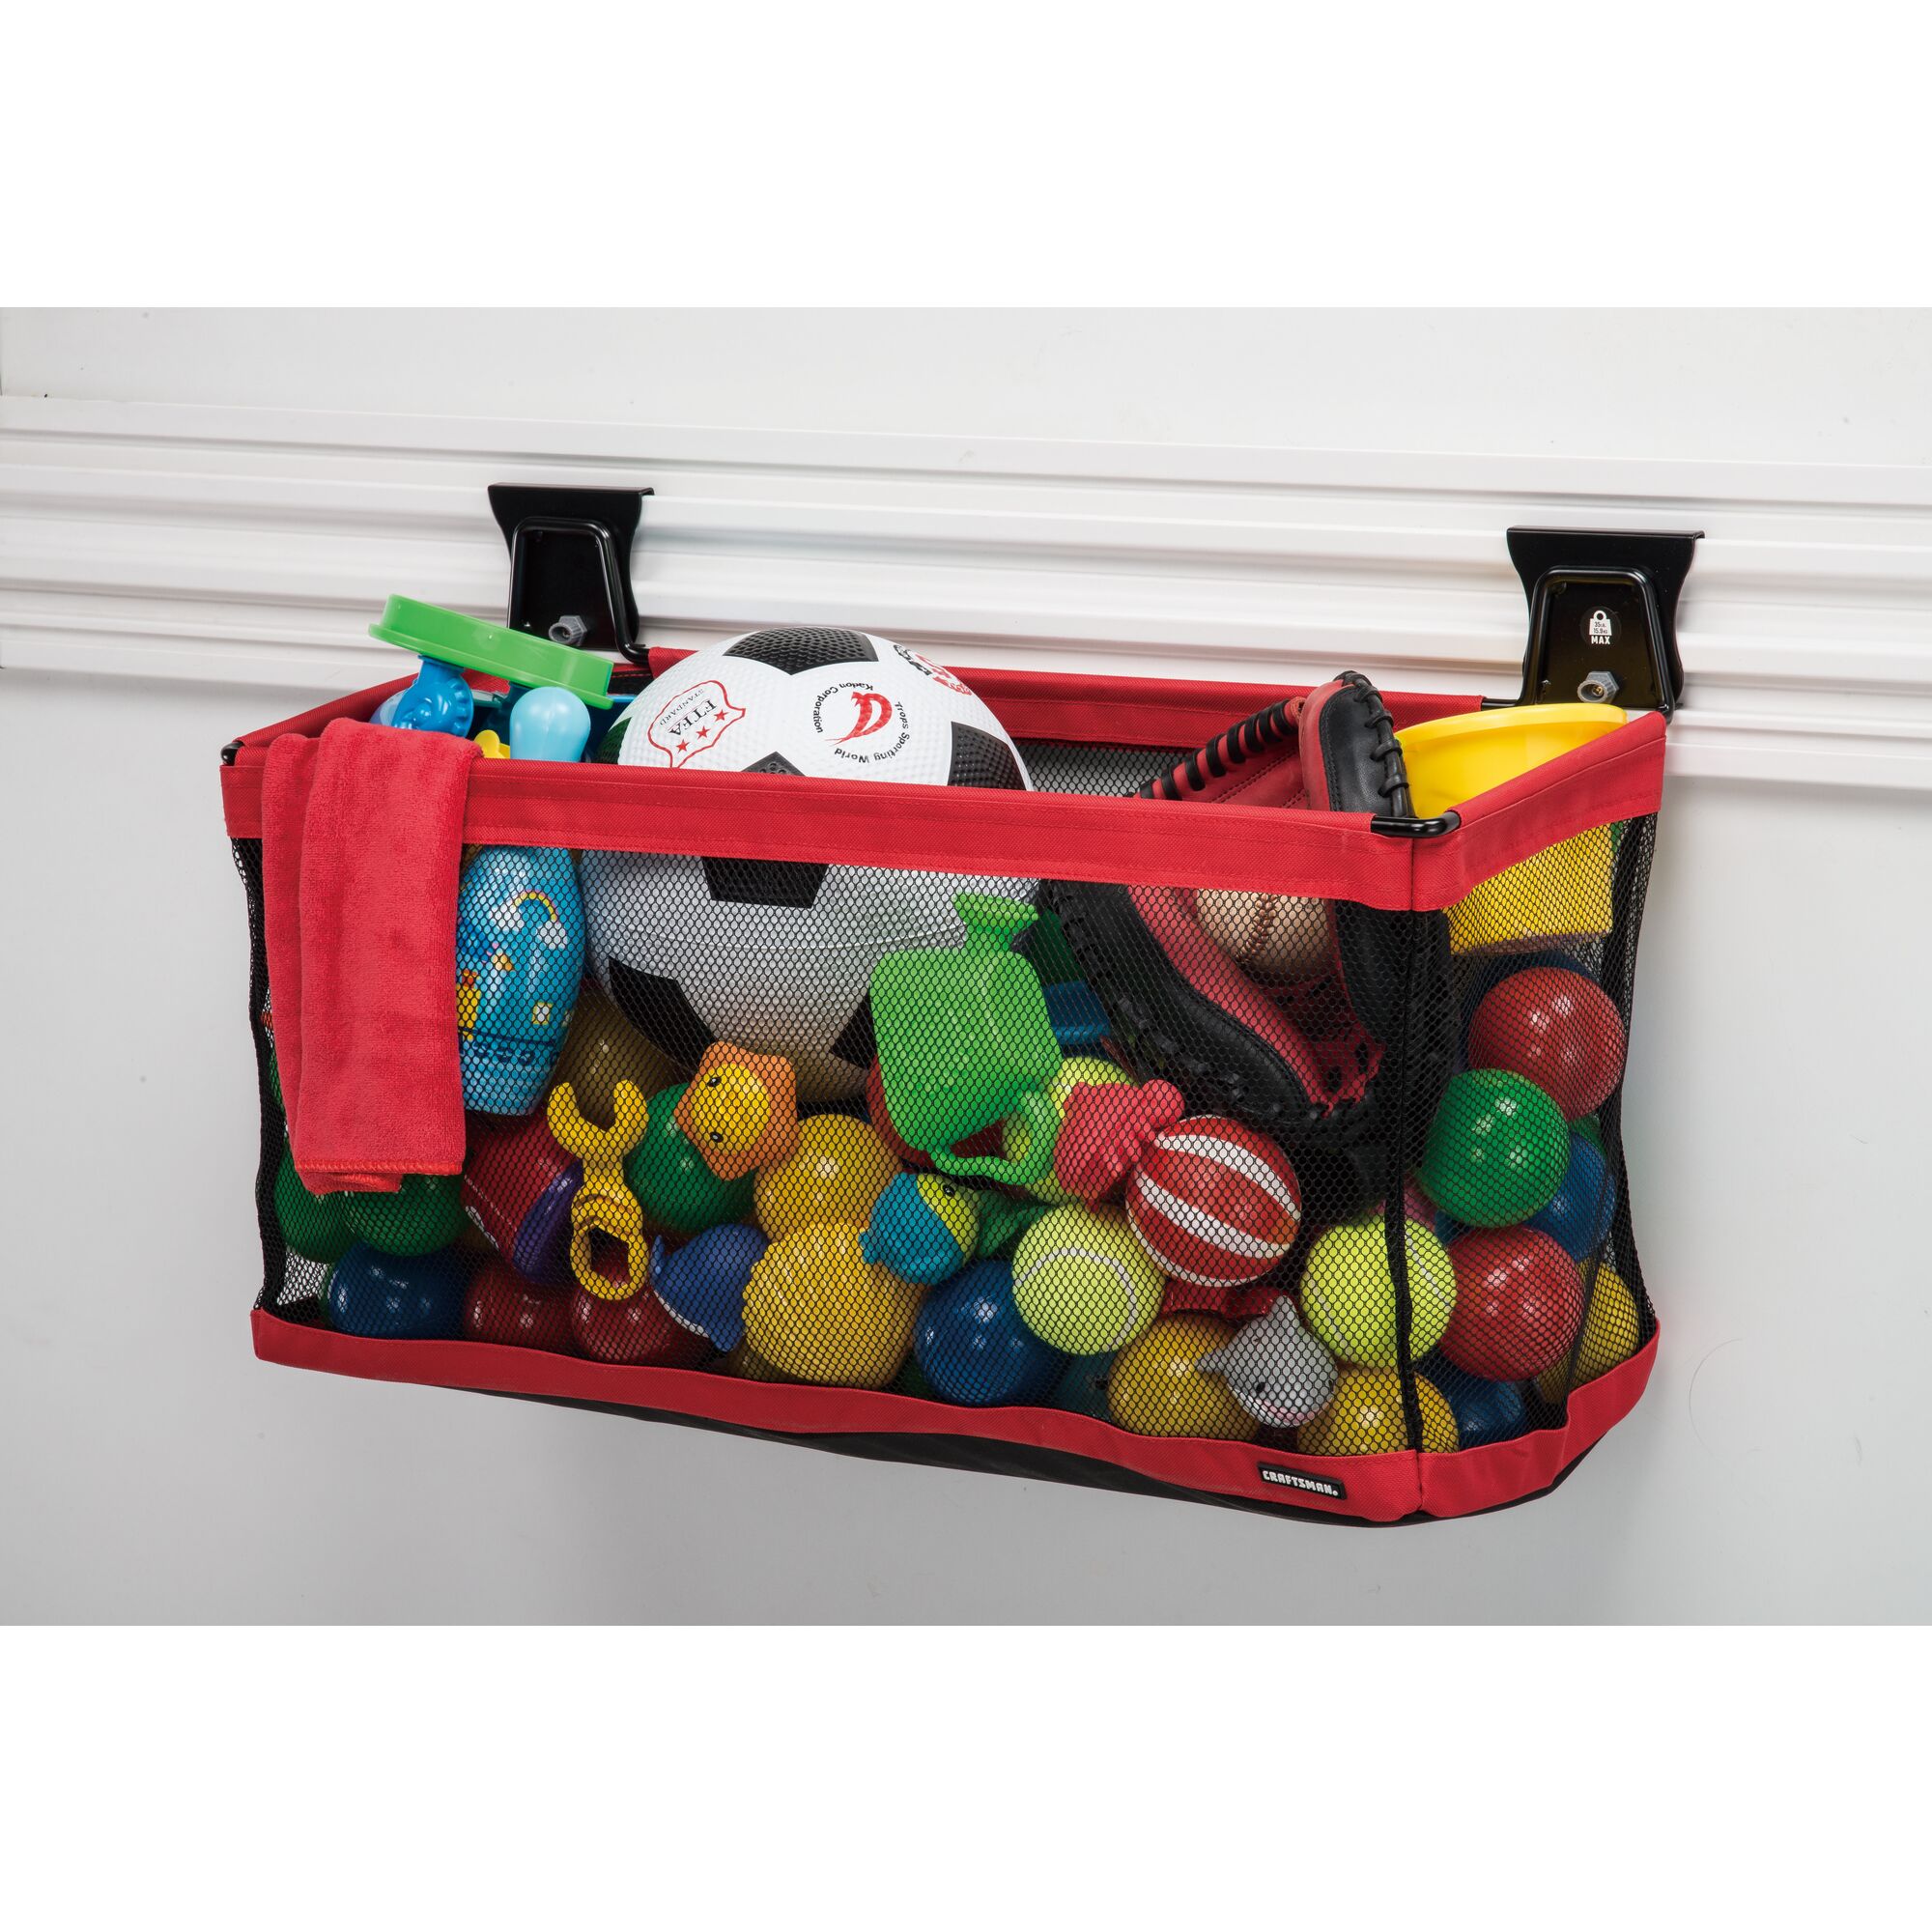 Black and red VERSATRACK 24 inch large mesh basket attached to white VERSATRACK trackwall filled with assorted childen's toys and sports balls